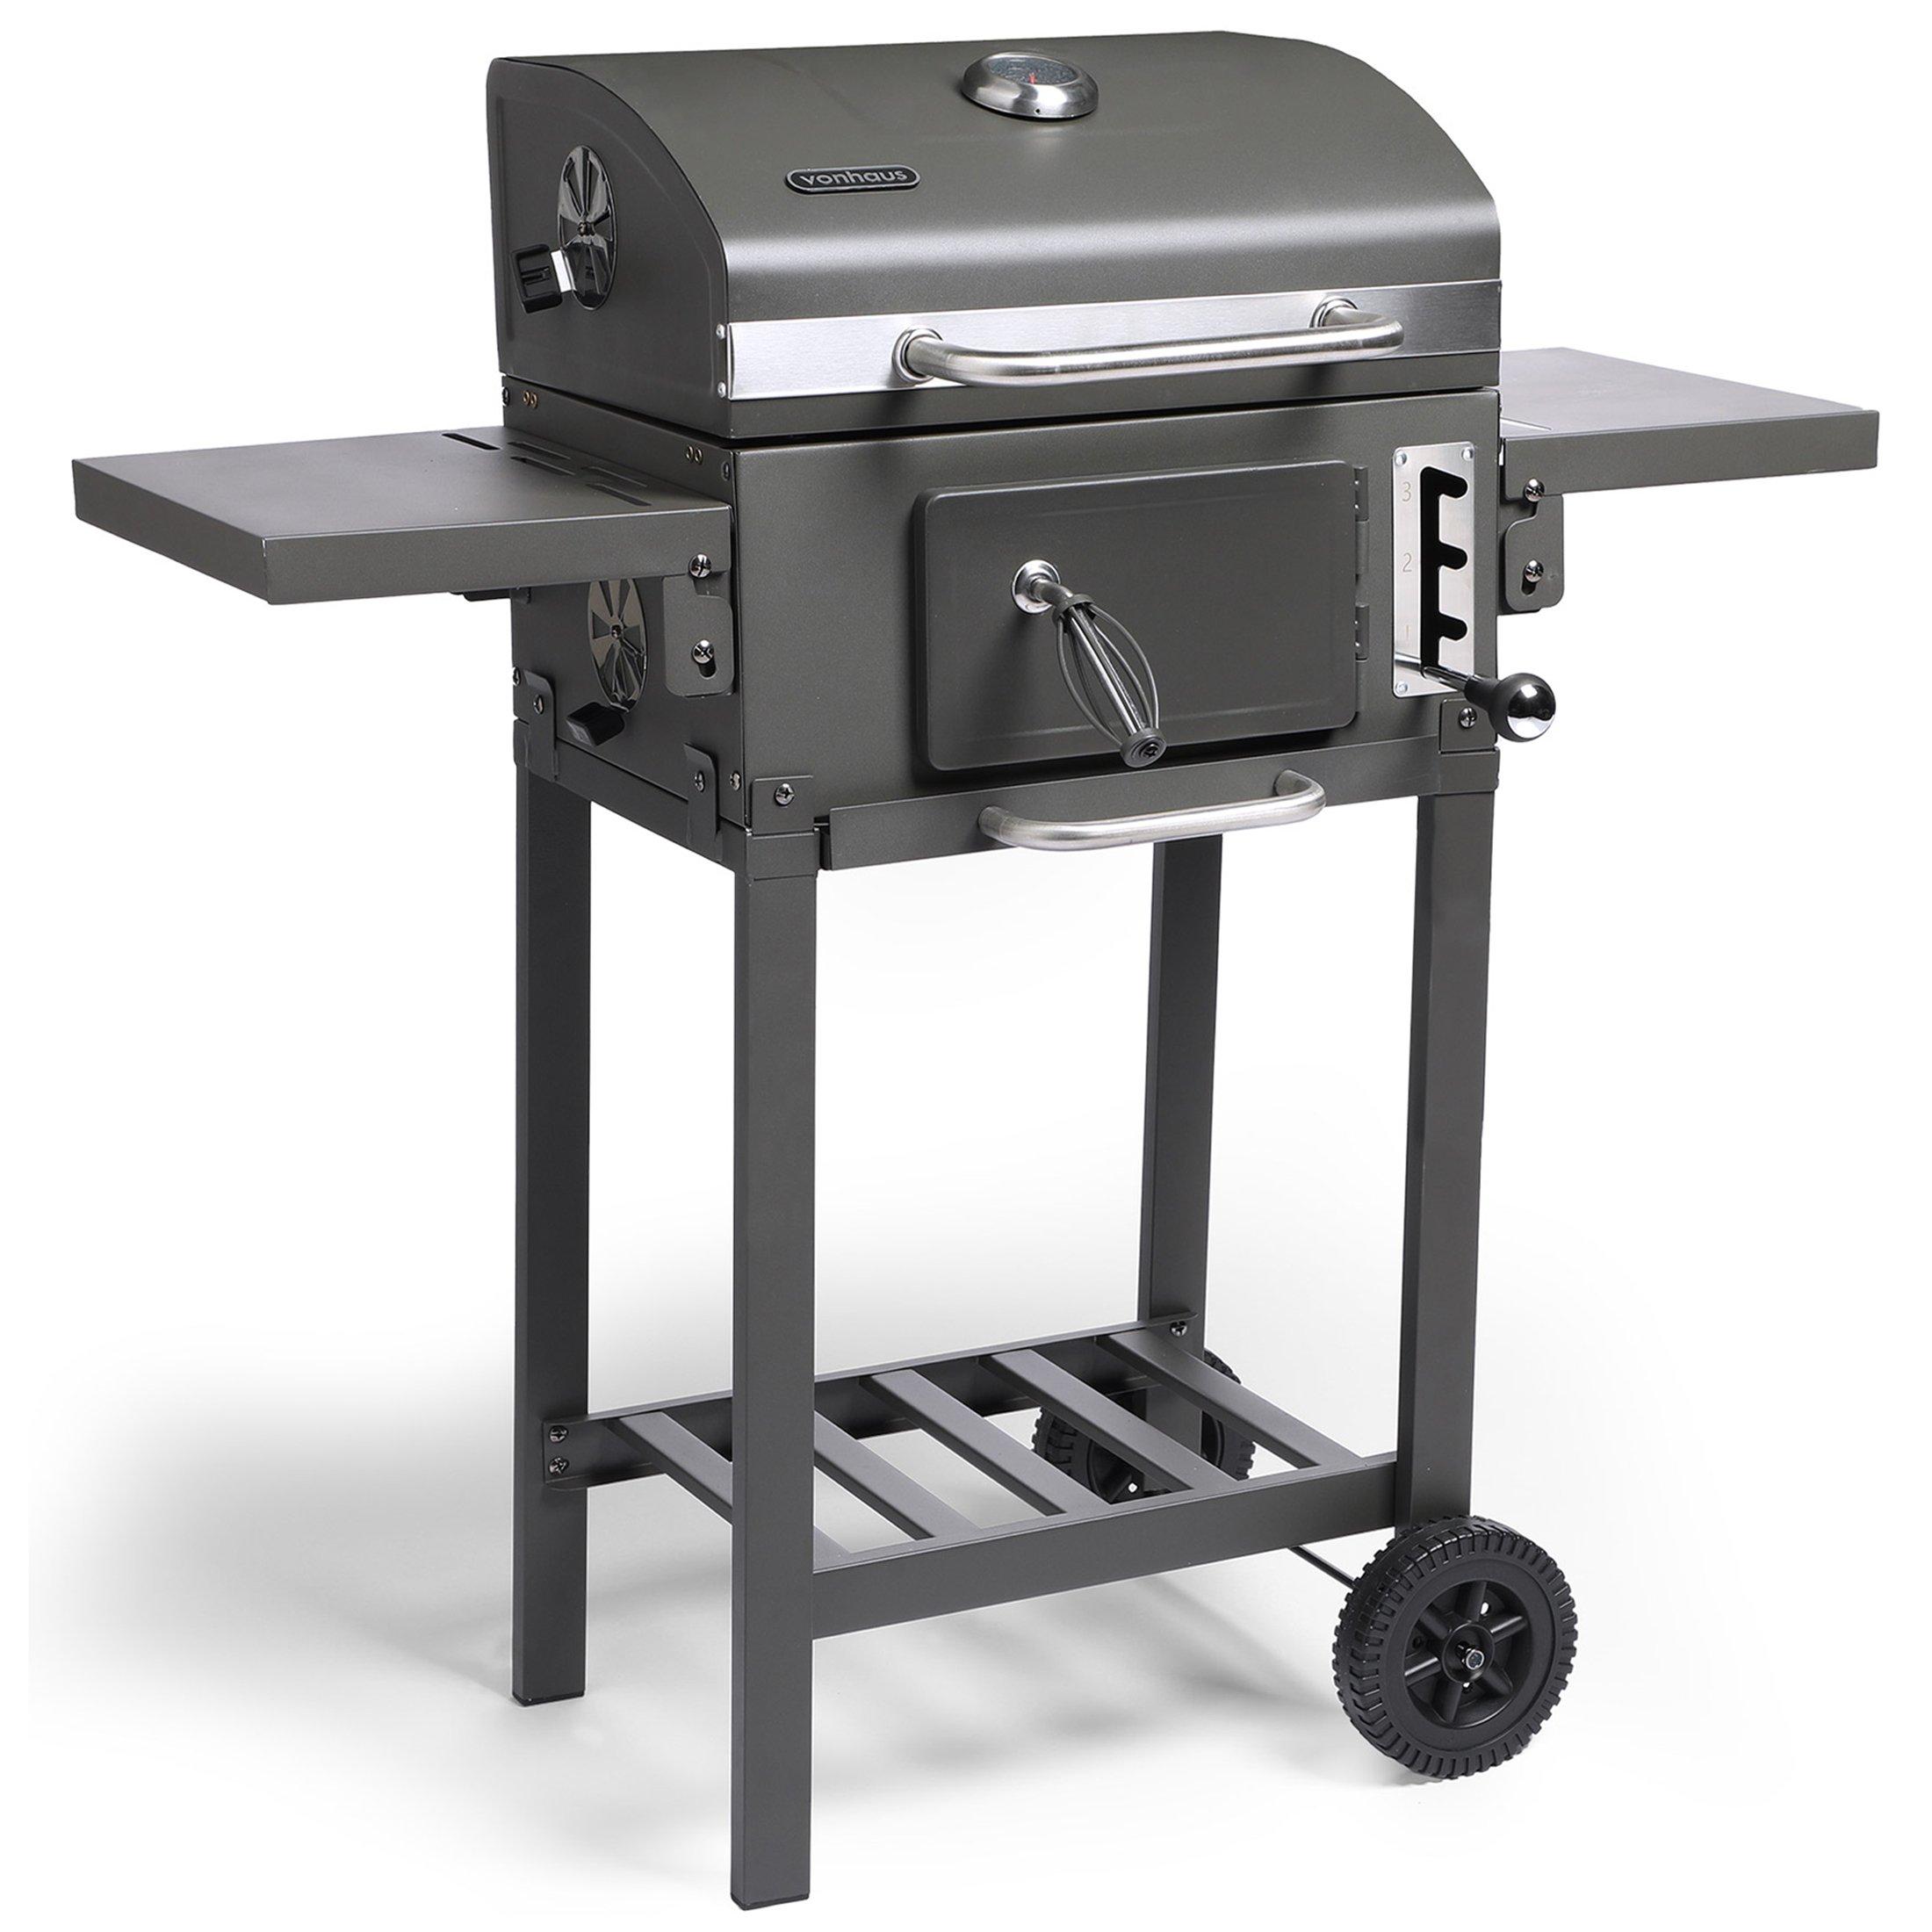 Warming Rack & 2 Foldable Side Tables Portable Charcoal Barbecue